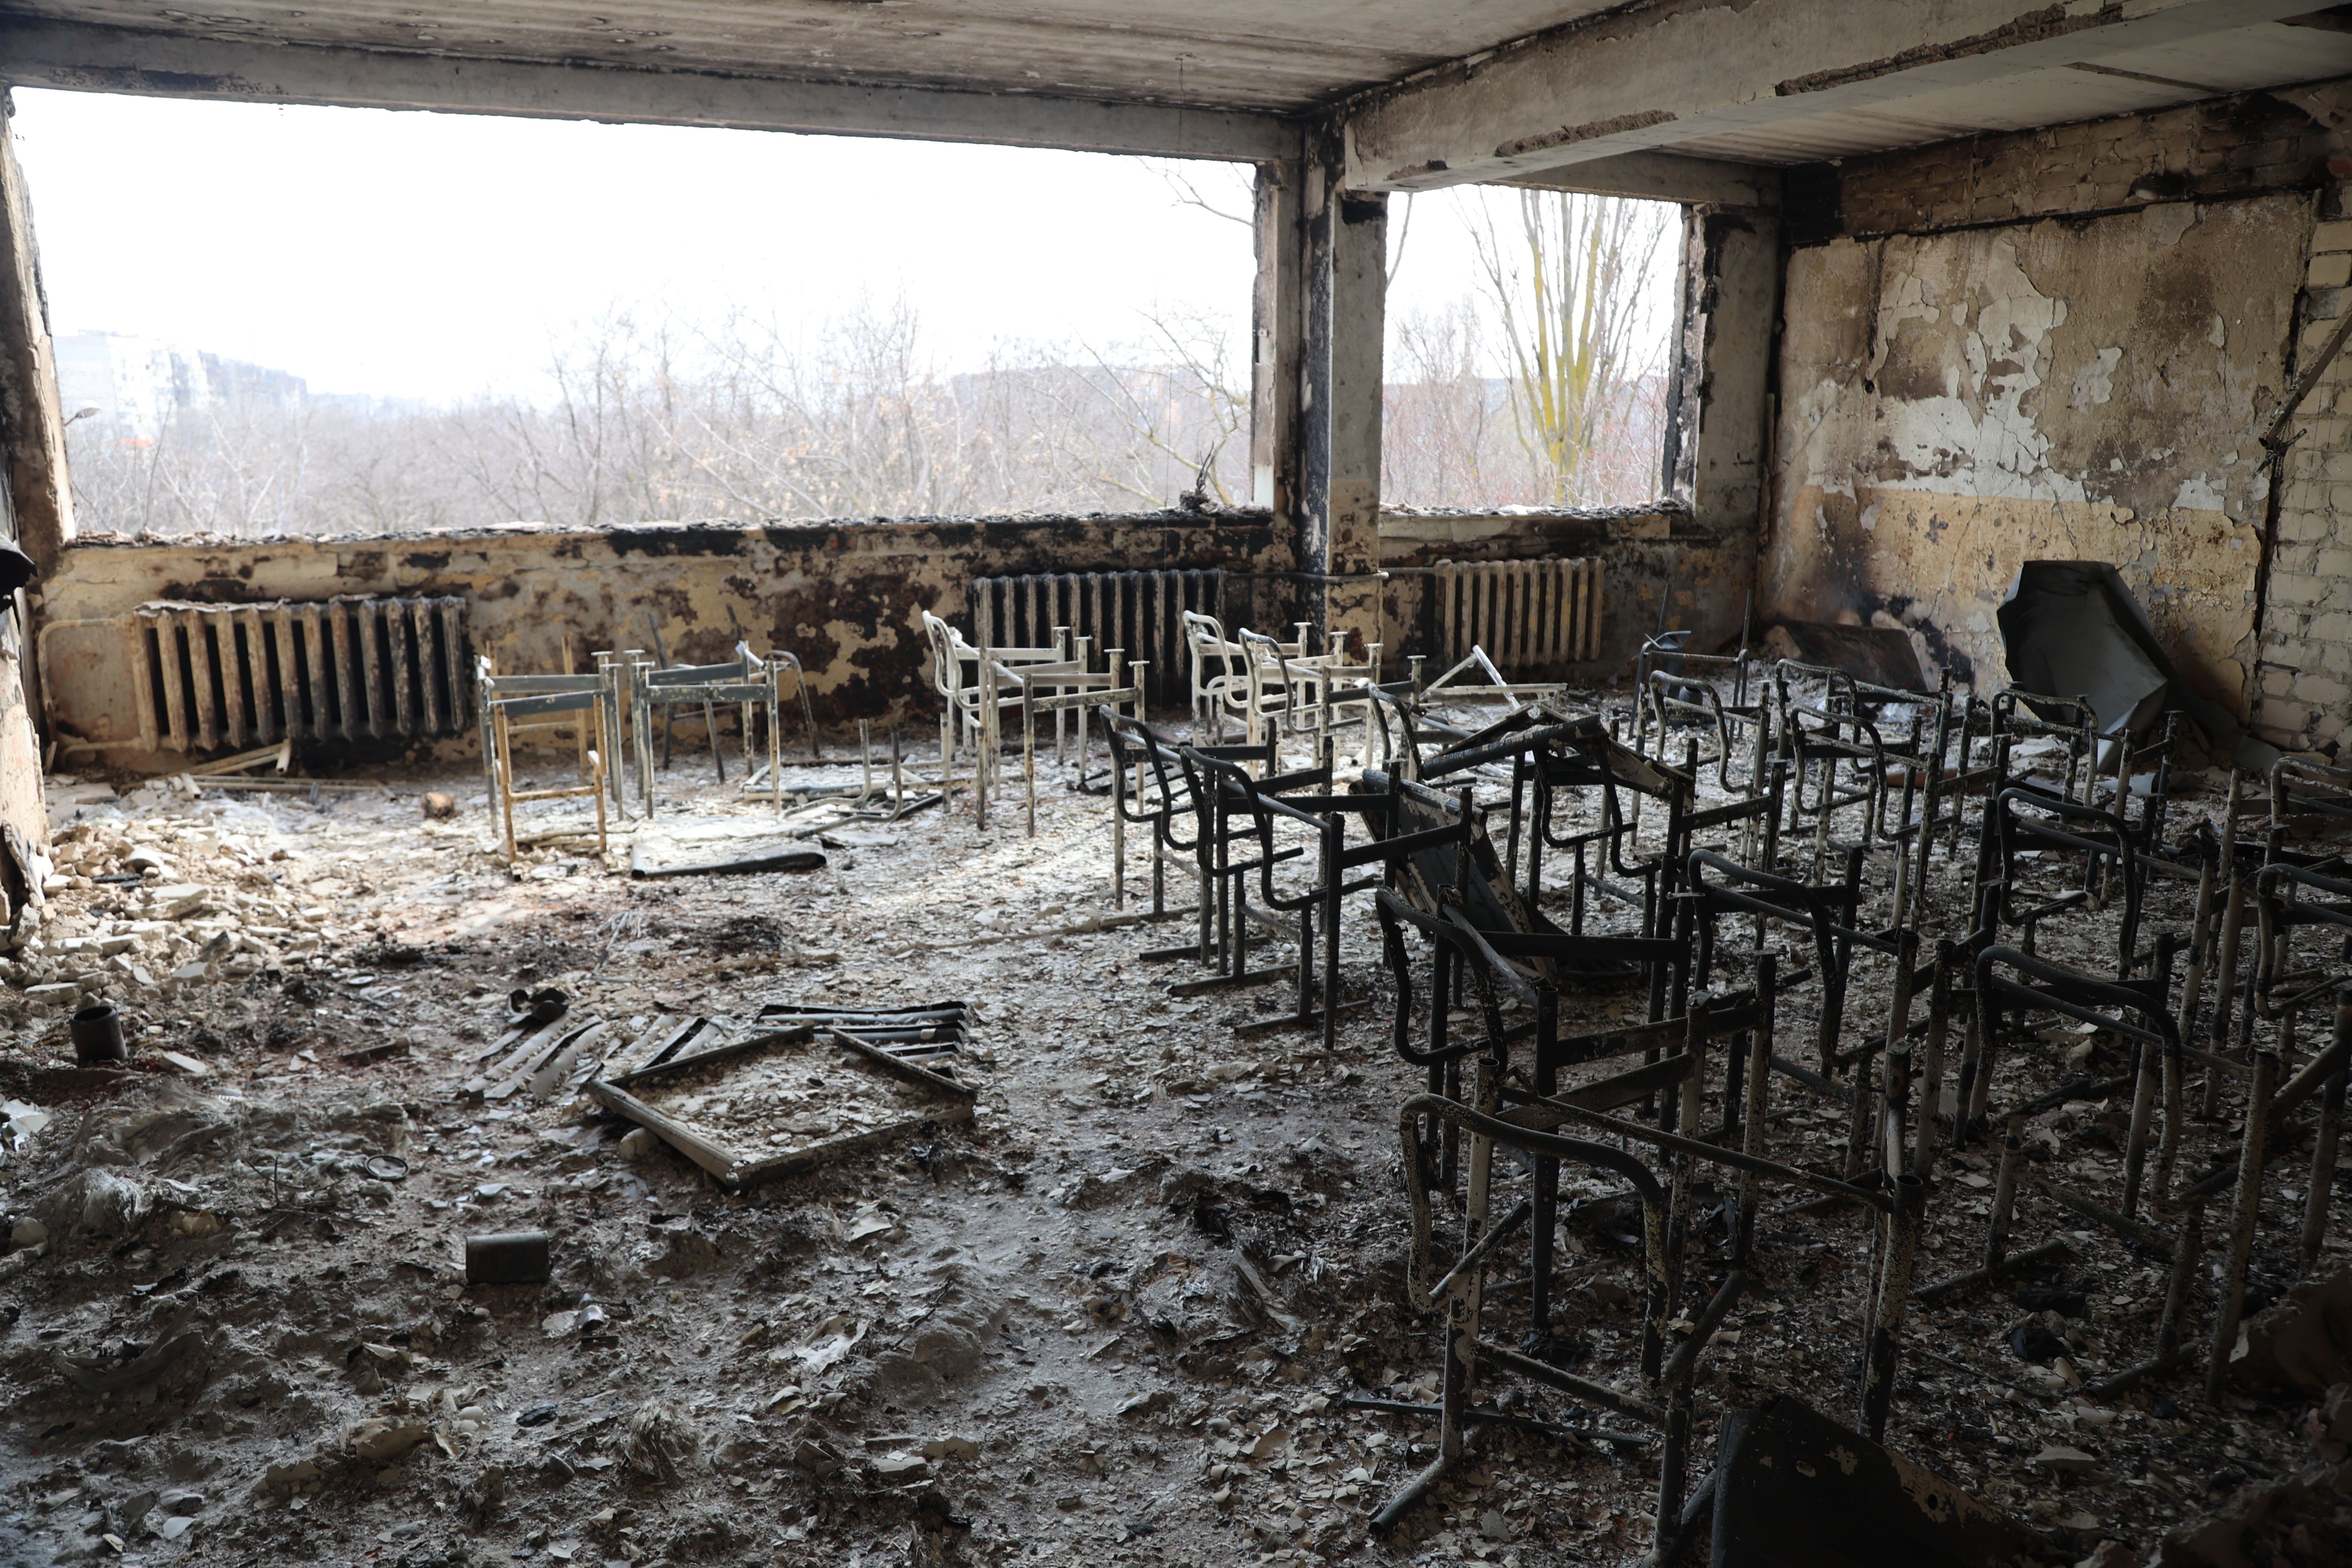   A view of damaged school after shelling in the Ukrainian city of Mariupol under the control of Russian military and pro-Russian separatists, on March 29.